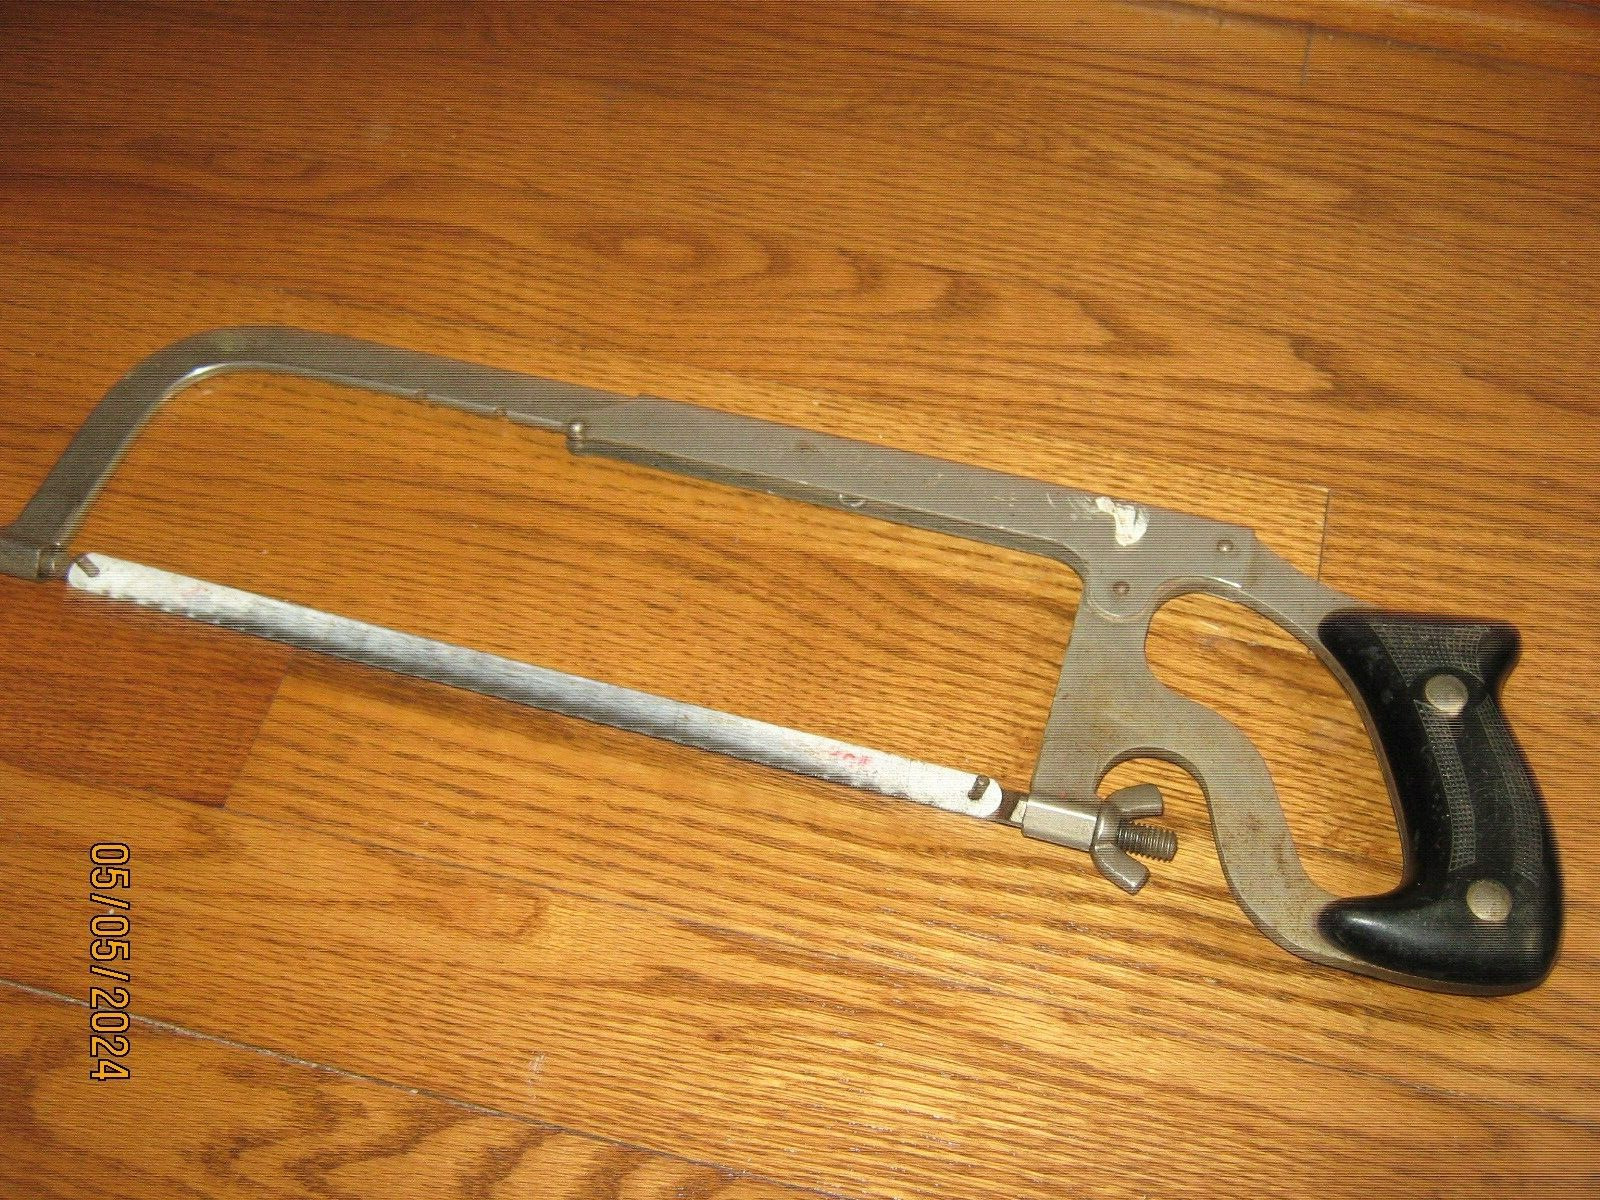 Vintage Miller Falls Greenfield MA No. 48 Hacksaw USA 2 EXTRA Blades Included